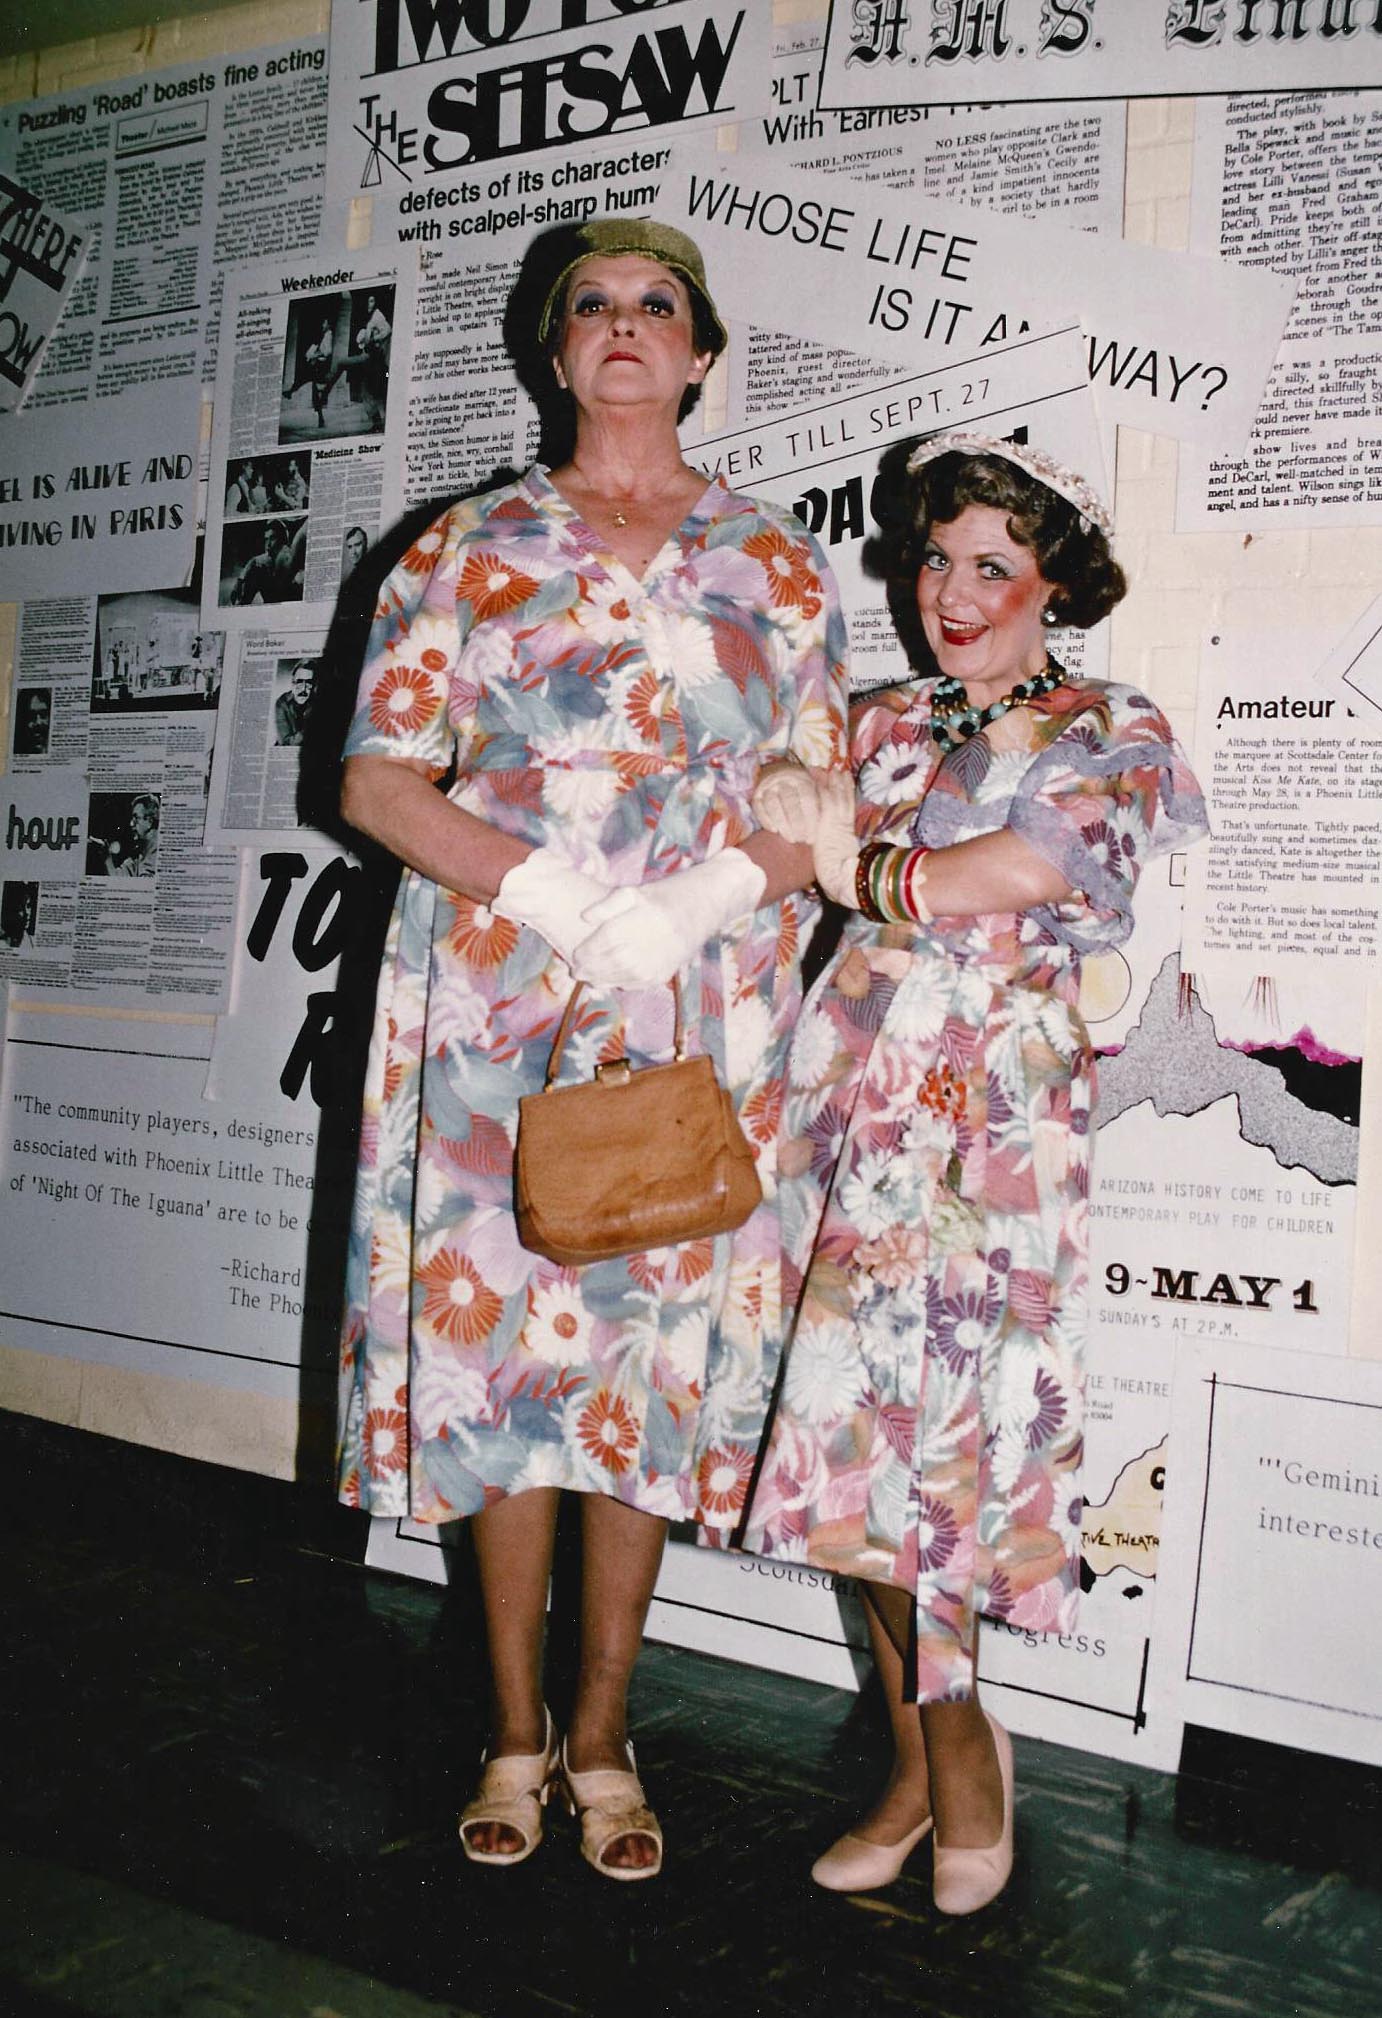 Eleanor Hoffman and Jan Sandwich in "Damn Yankees," produced at Phoenix Little Theatre in the 1970s or '80s. (Photo from the collection of Jan Sandwich)